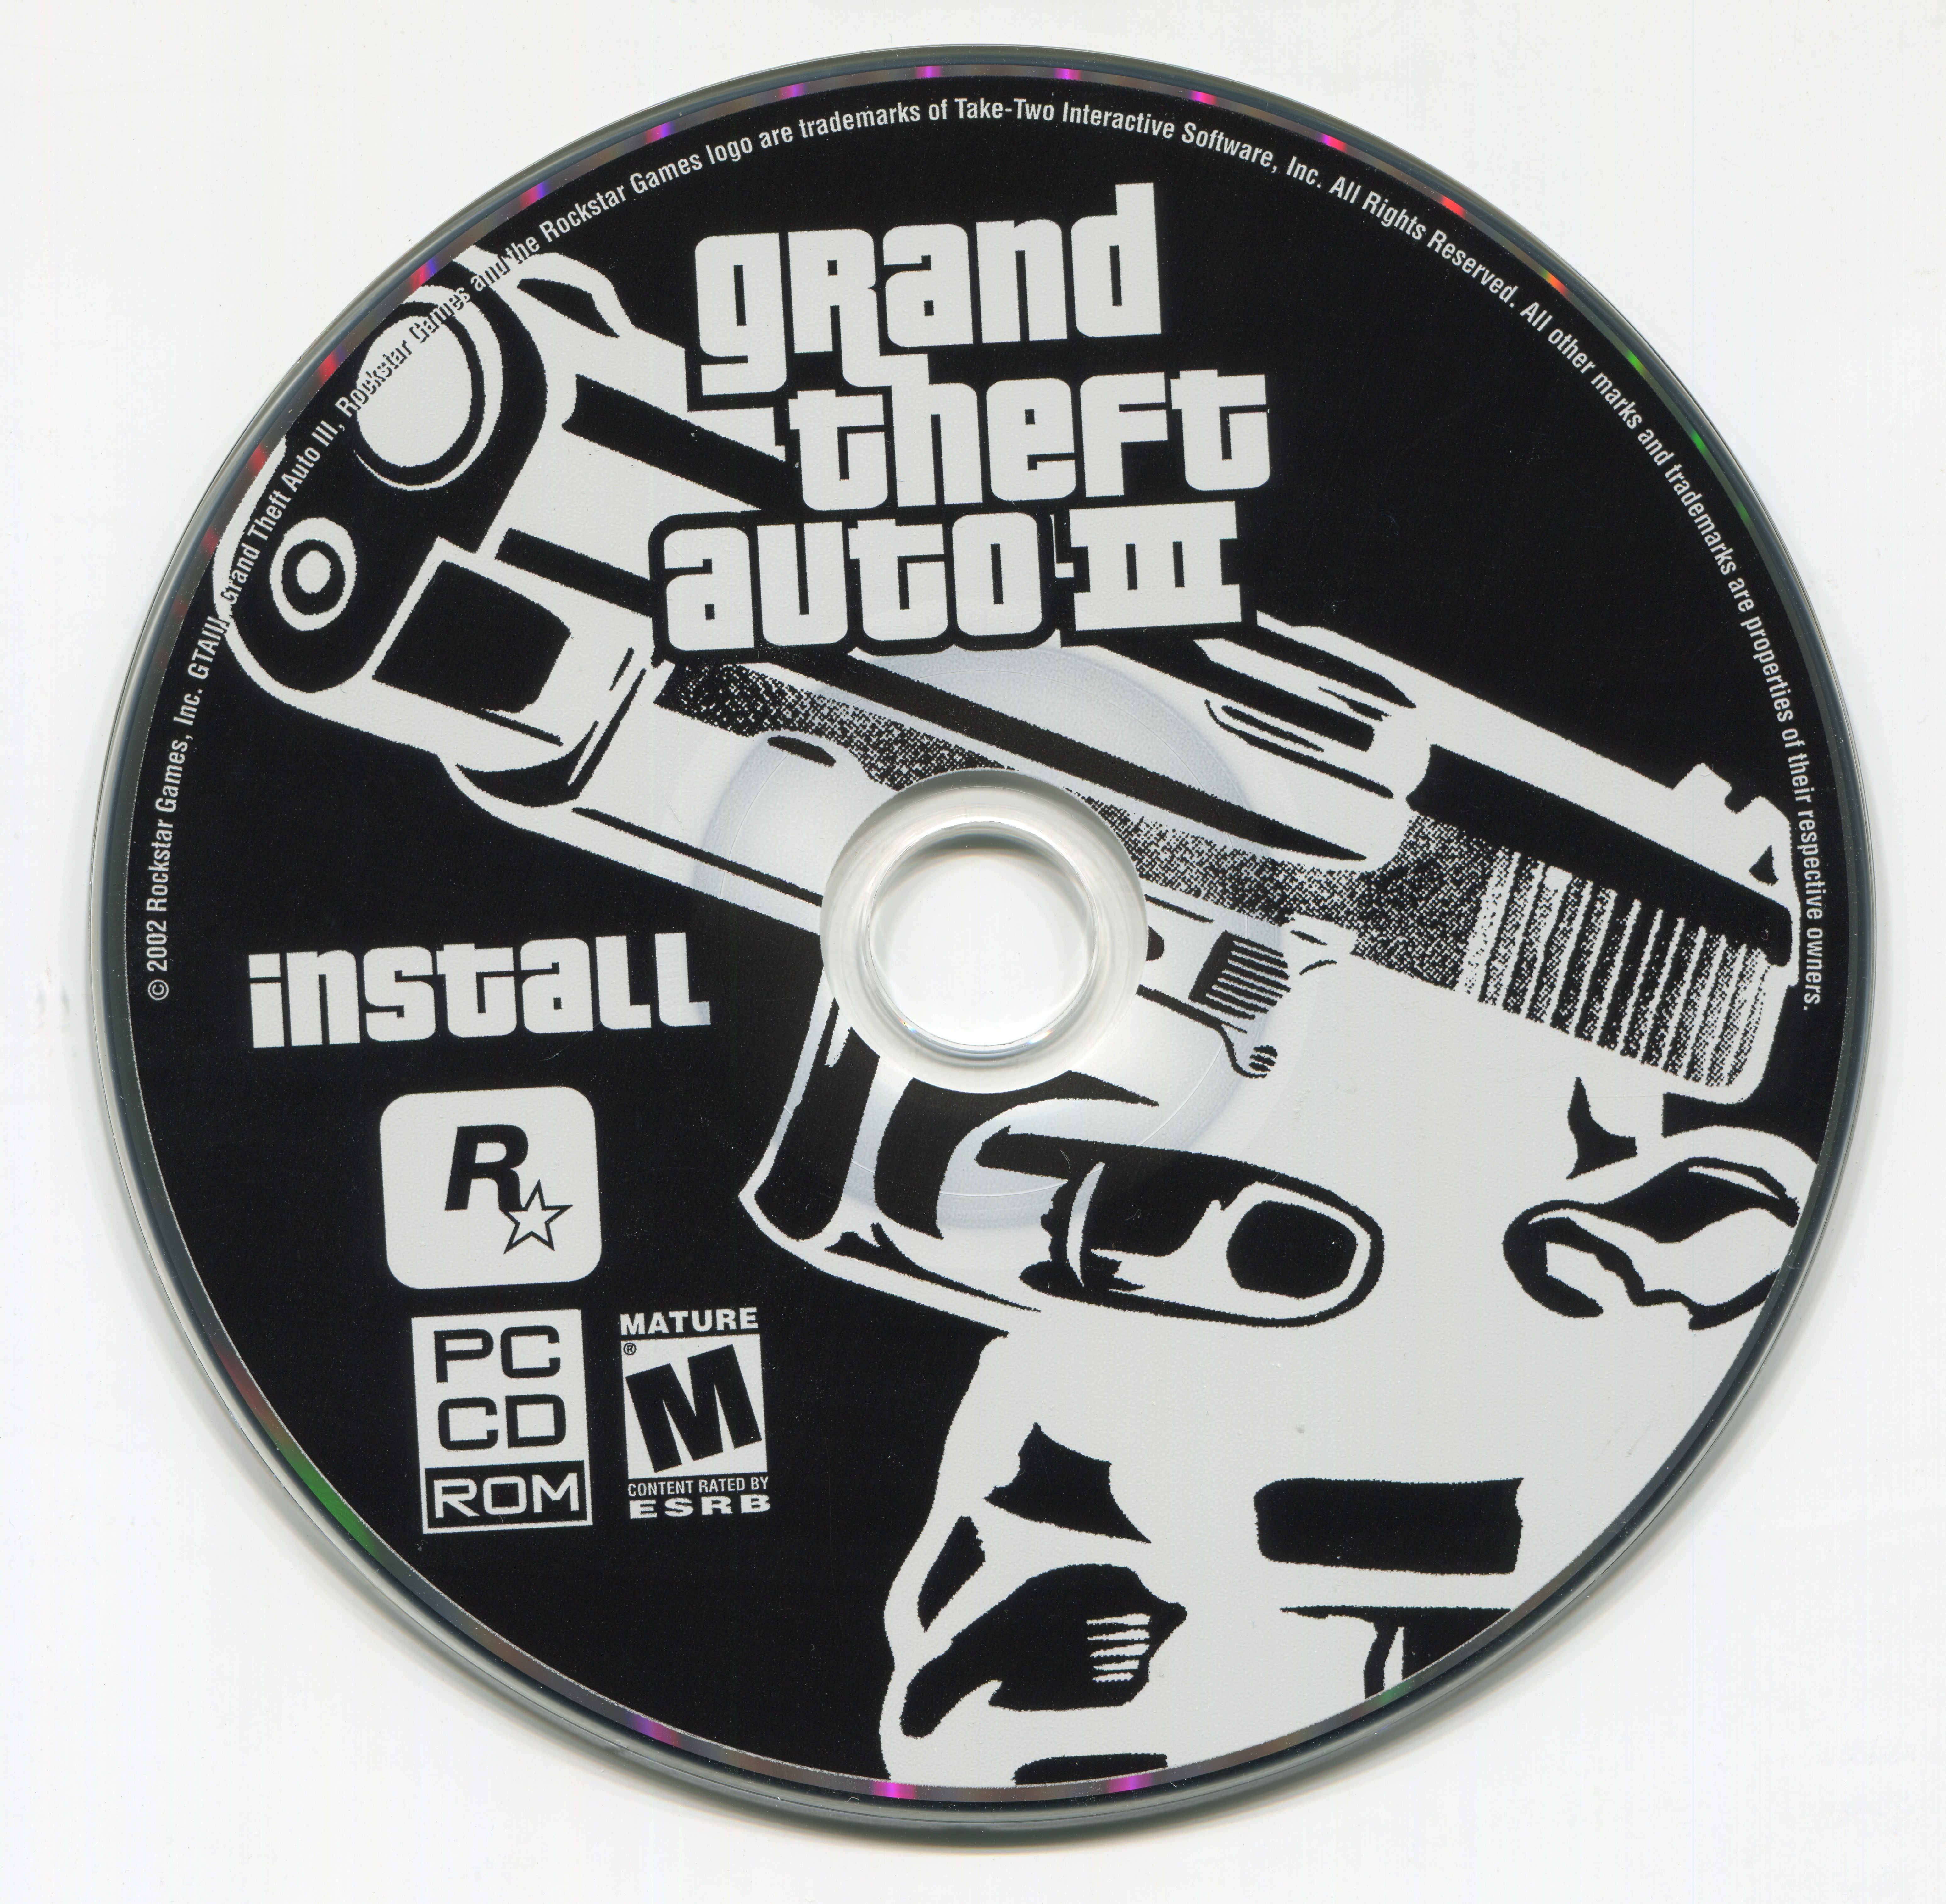 Grand Theft Auto III 2002 Rockstar Games Take Two Interactive 2 CD Set : Rockstar  Games, Take Two Interactive : Free Download, Borrow, and Streaming :  Internet Archive